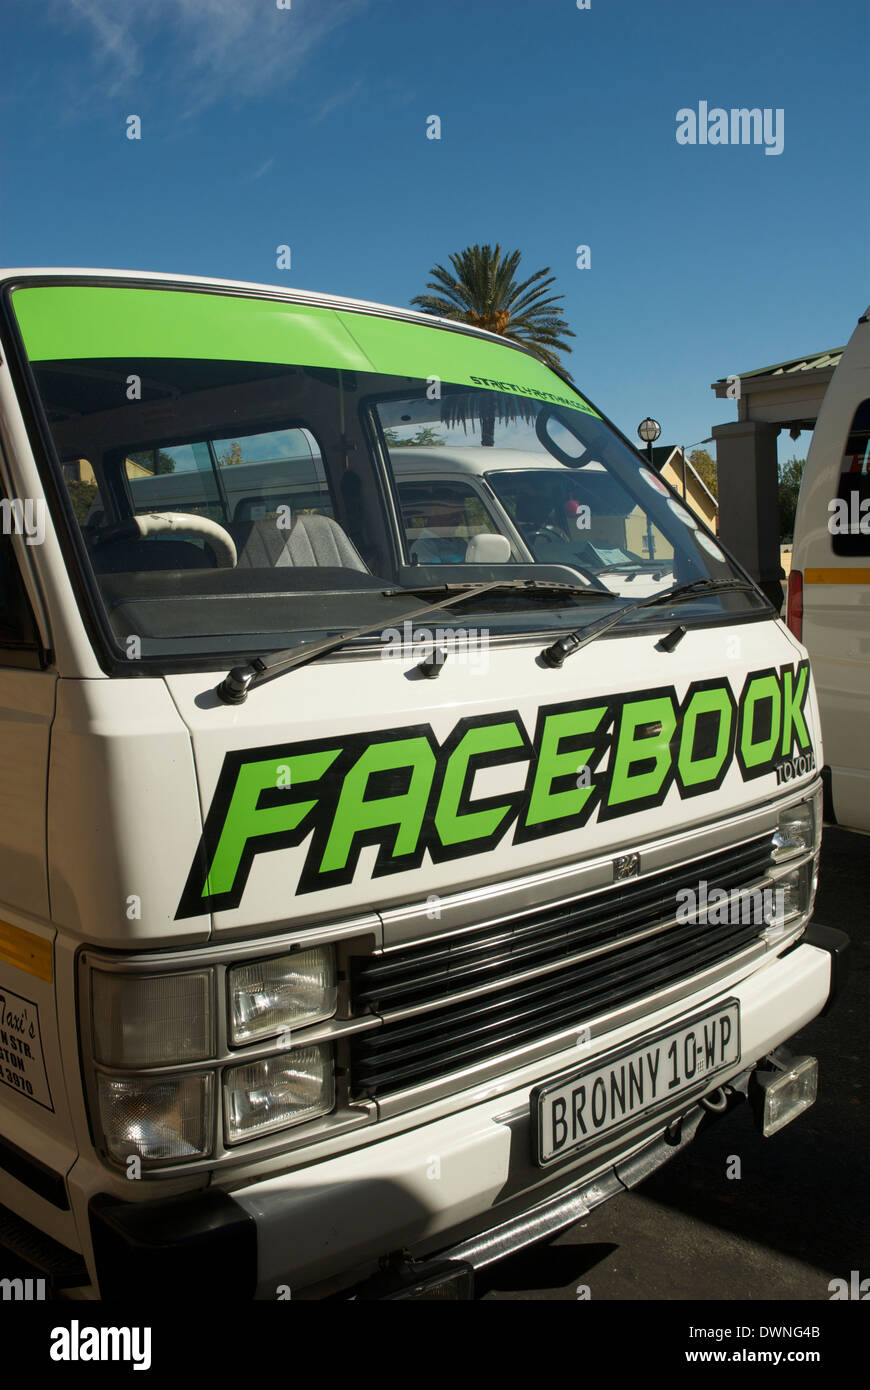 Minibus taxi, Worcester, Western Cape, South Africa, 2011 Stock Photo